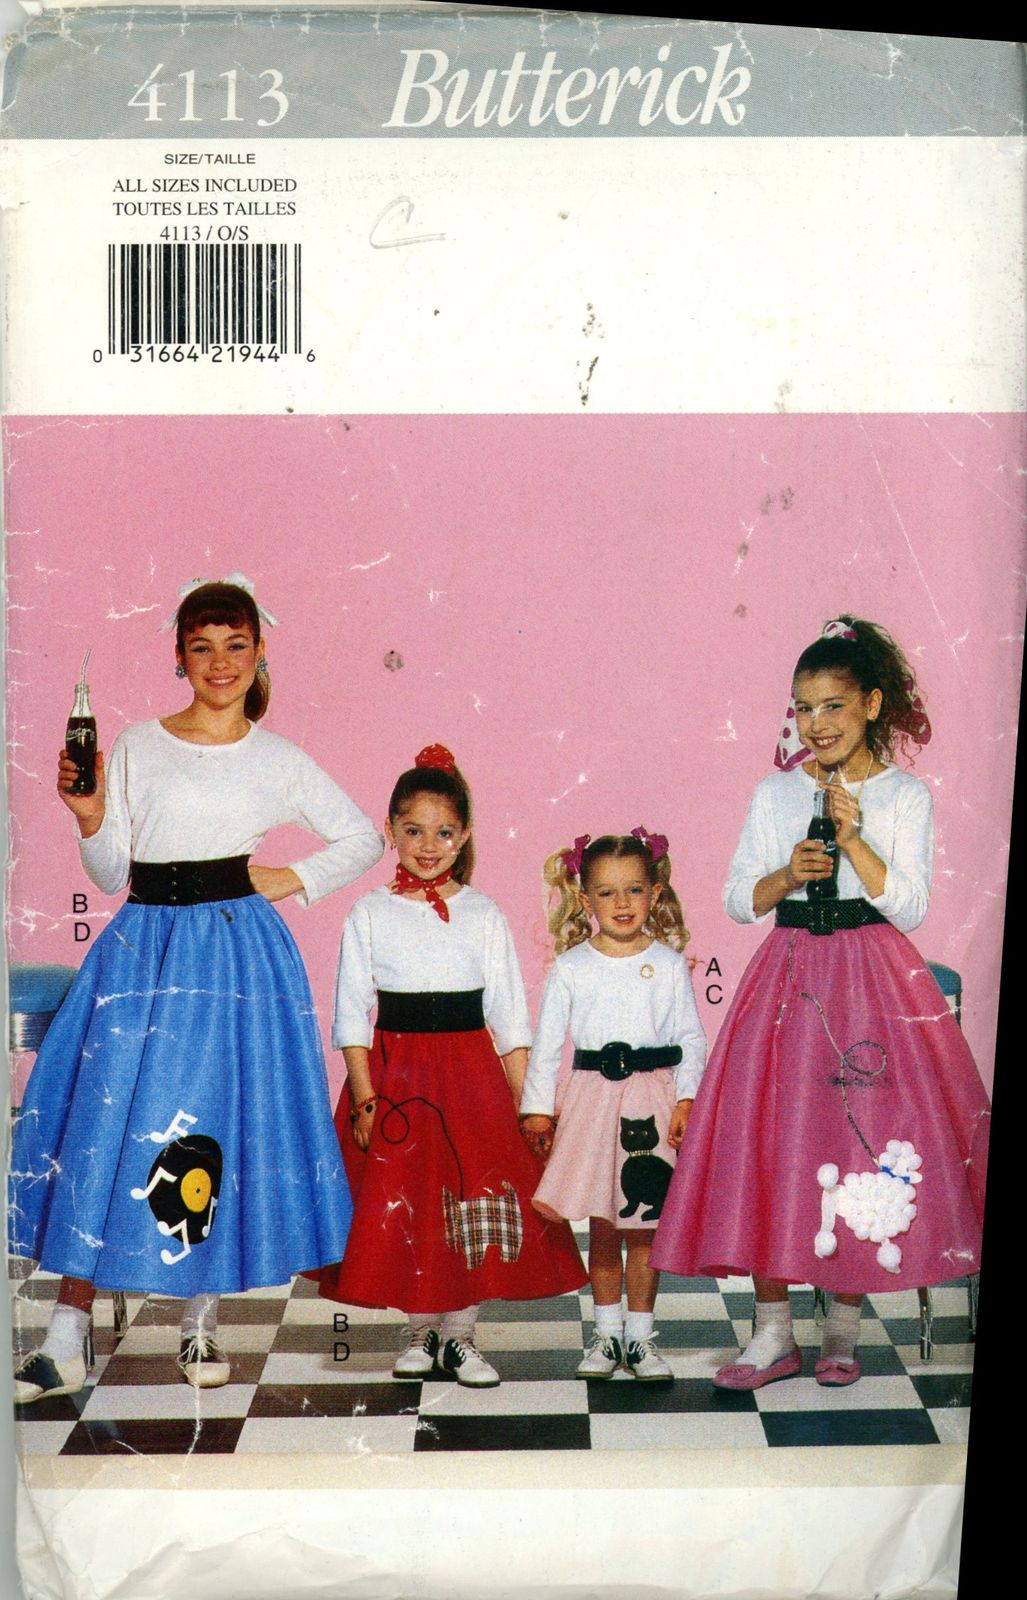 Butterick 4113 Poodle Skirts and Petticoats  Cut Size Girl 4-5  - $4.00